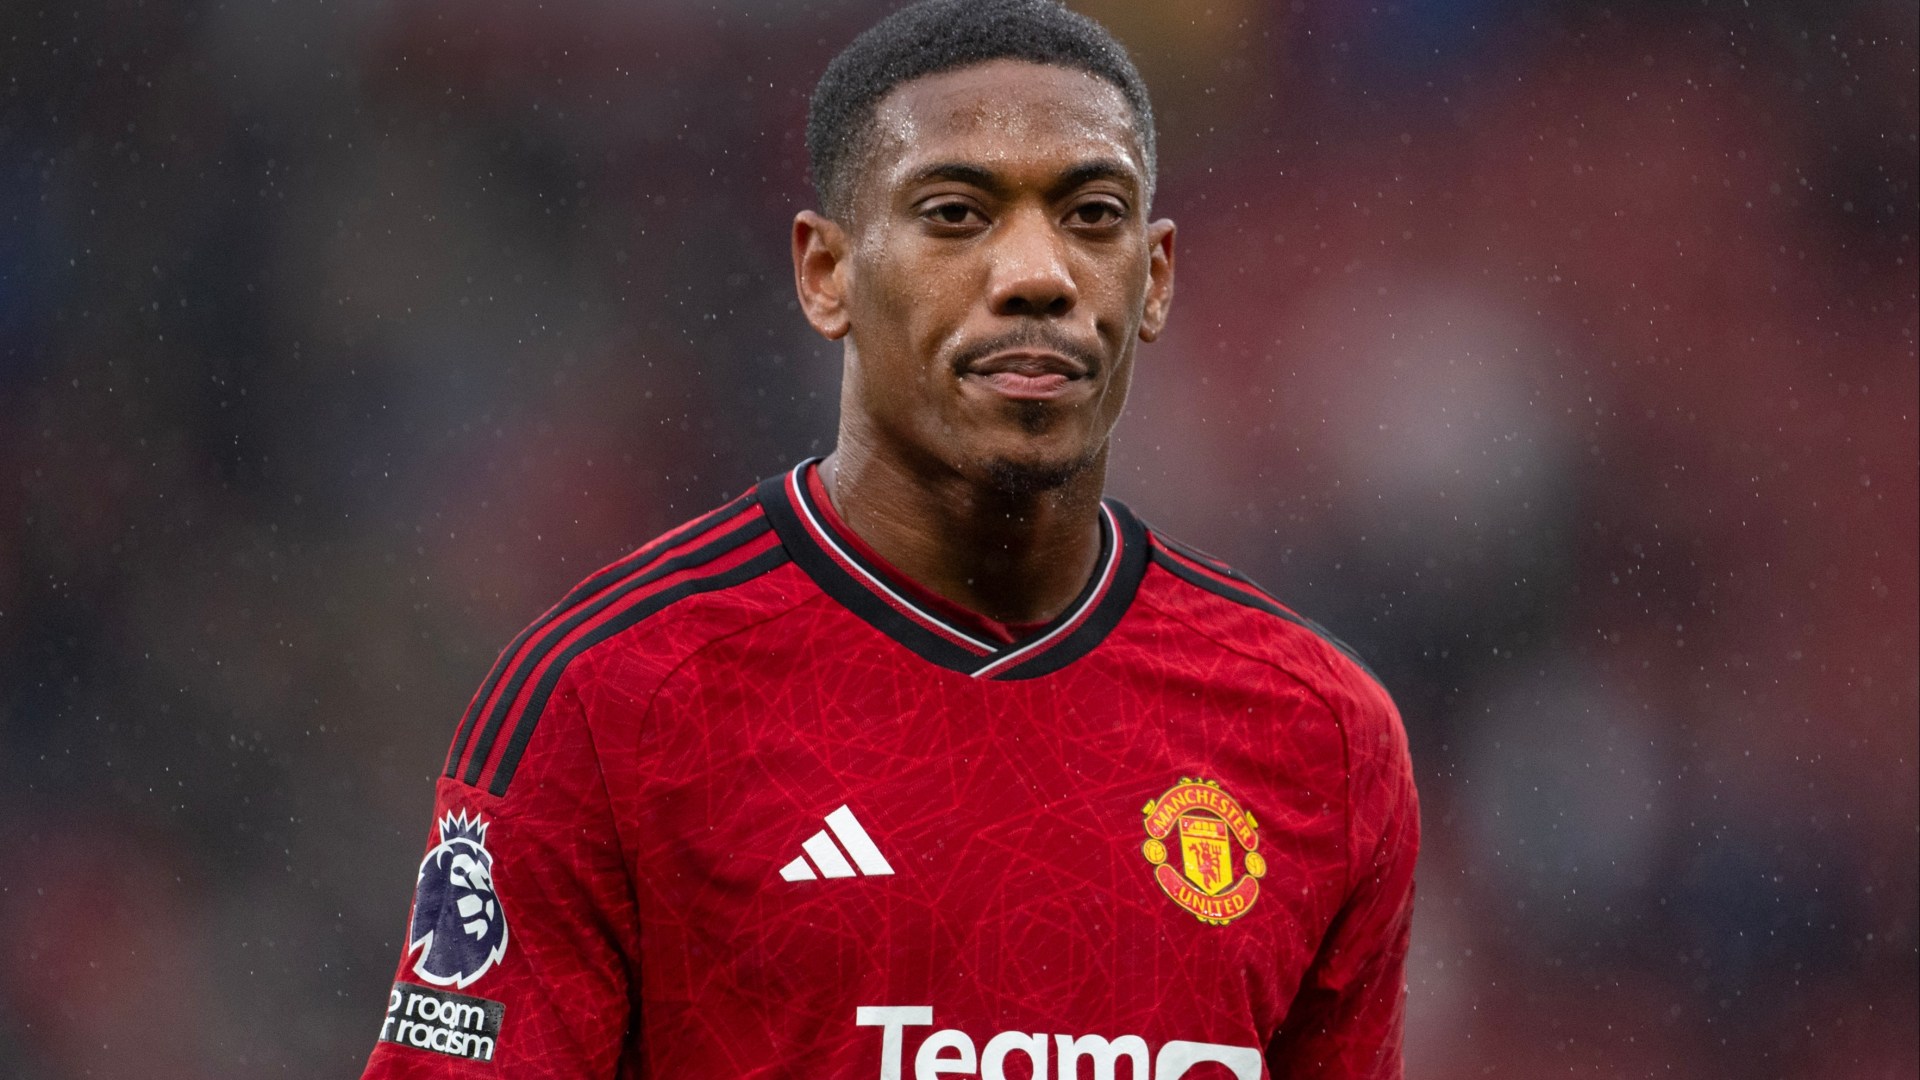 Transfer news LIVE: Anthony Martial to Inter swap deal, Tottenham monitoring Solanke, Chelsea set hefty Gallagher price